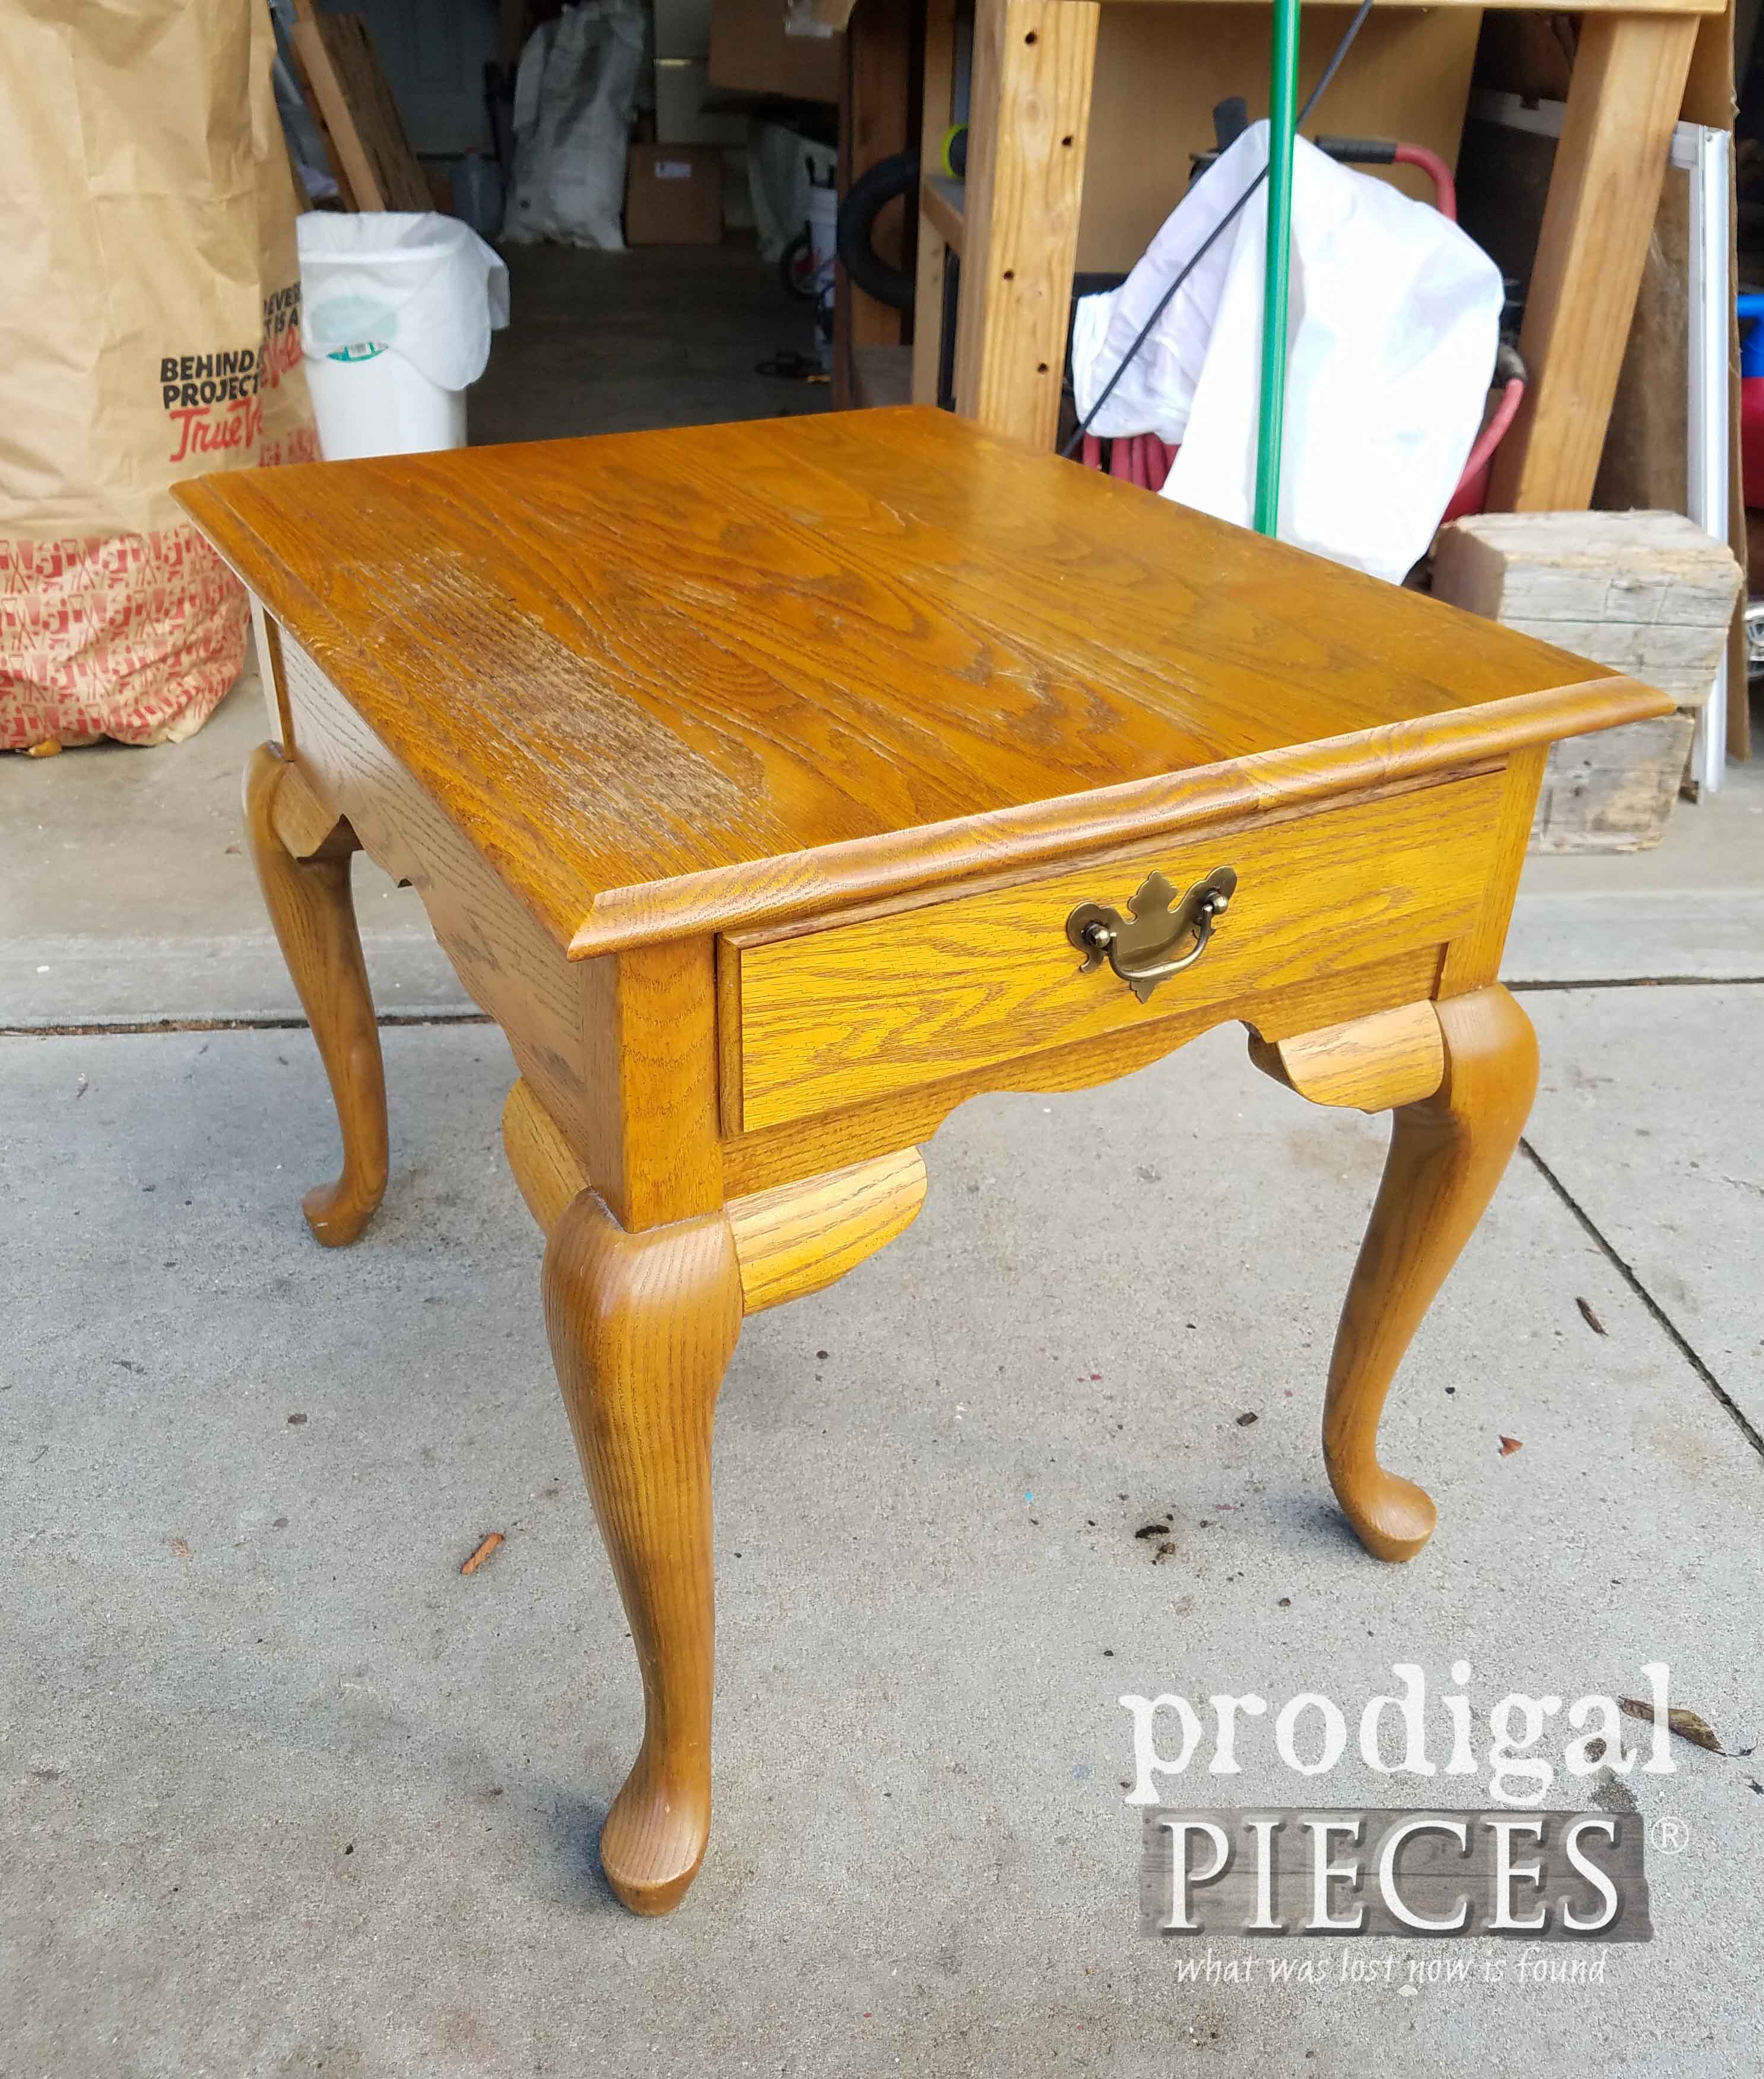 Queen Anne Table Before Makeover by Prodigal Pieces | prodigalpieces.com